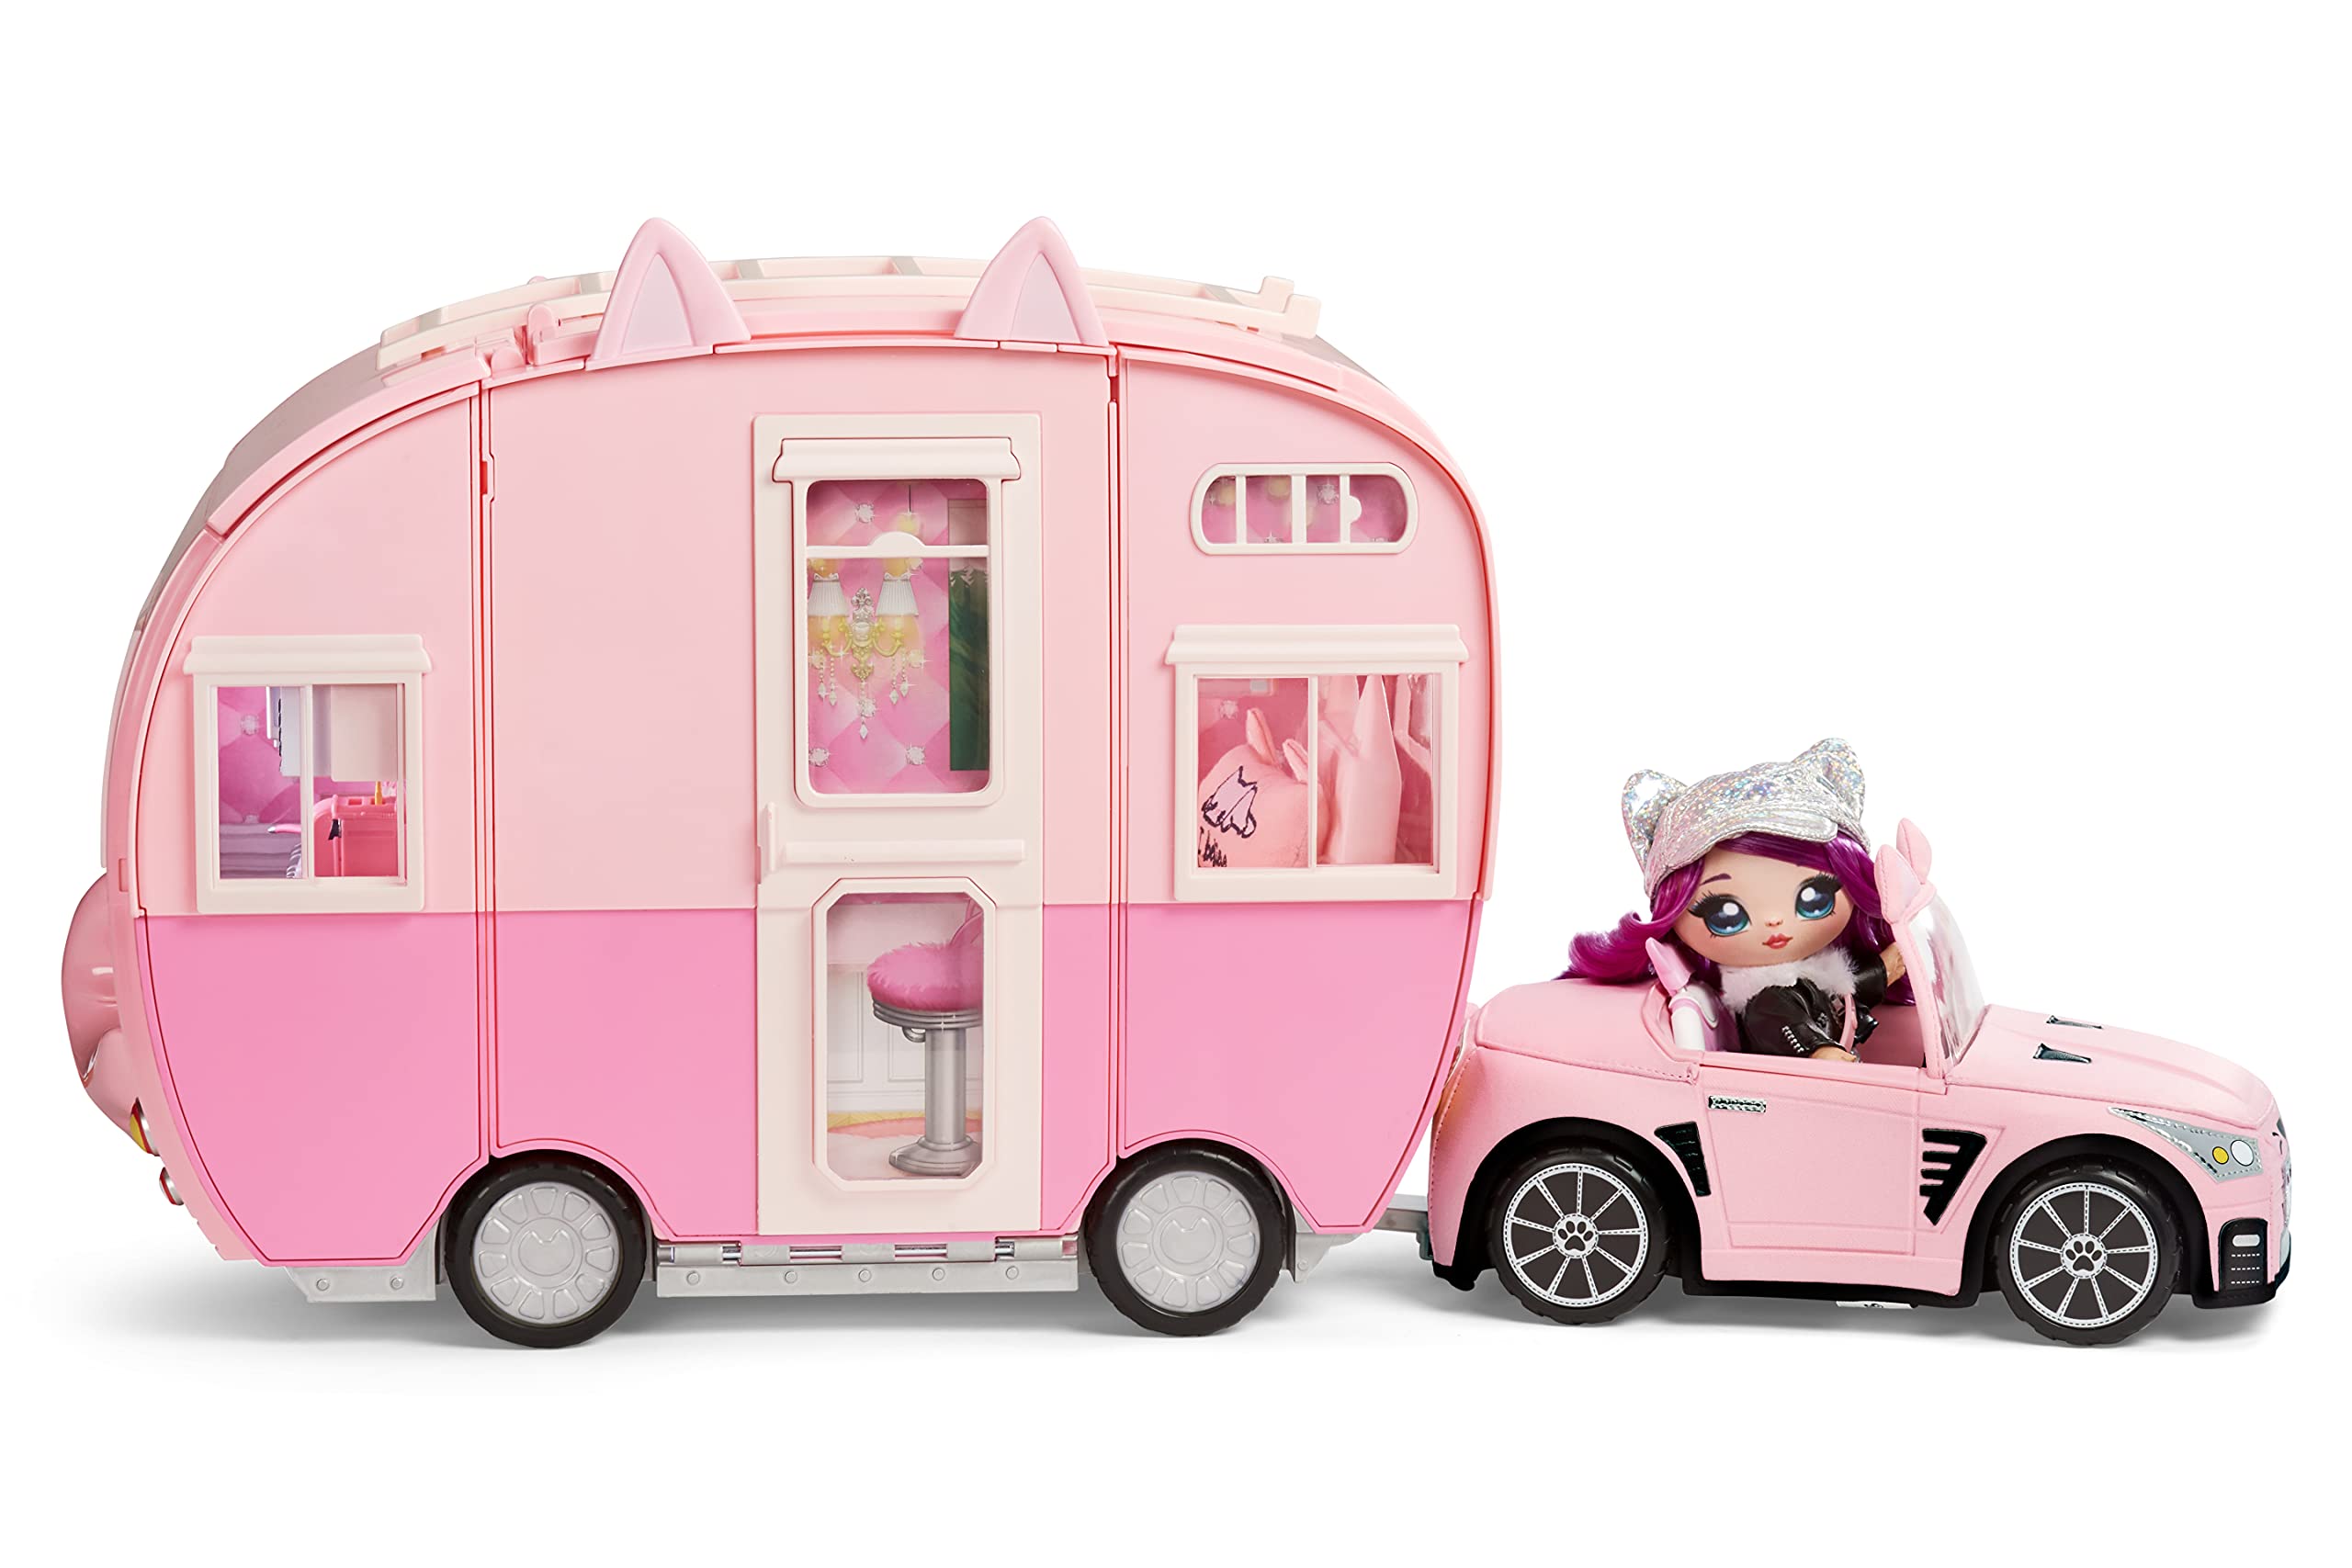 Na Na Na Surprise Kitty-Cat Camper Playset, Pink Toy Car Vehicle for Fashion Dolls with Cat Ears & Tail, Opens to 3 Feet Wide for 360 Play, 7 Areas, Accessories, Gift for Kids Ages 5 6 7 8+ Years